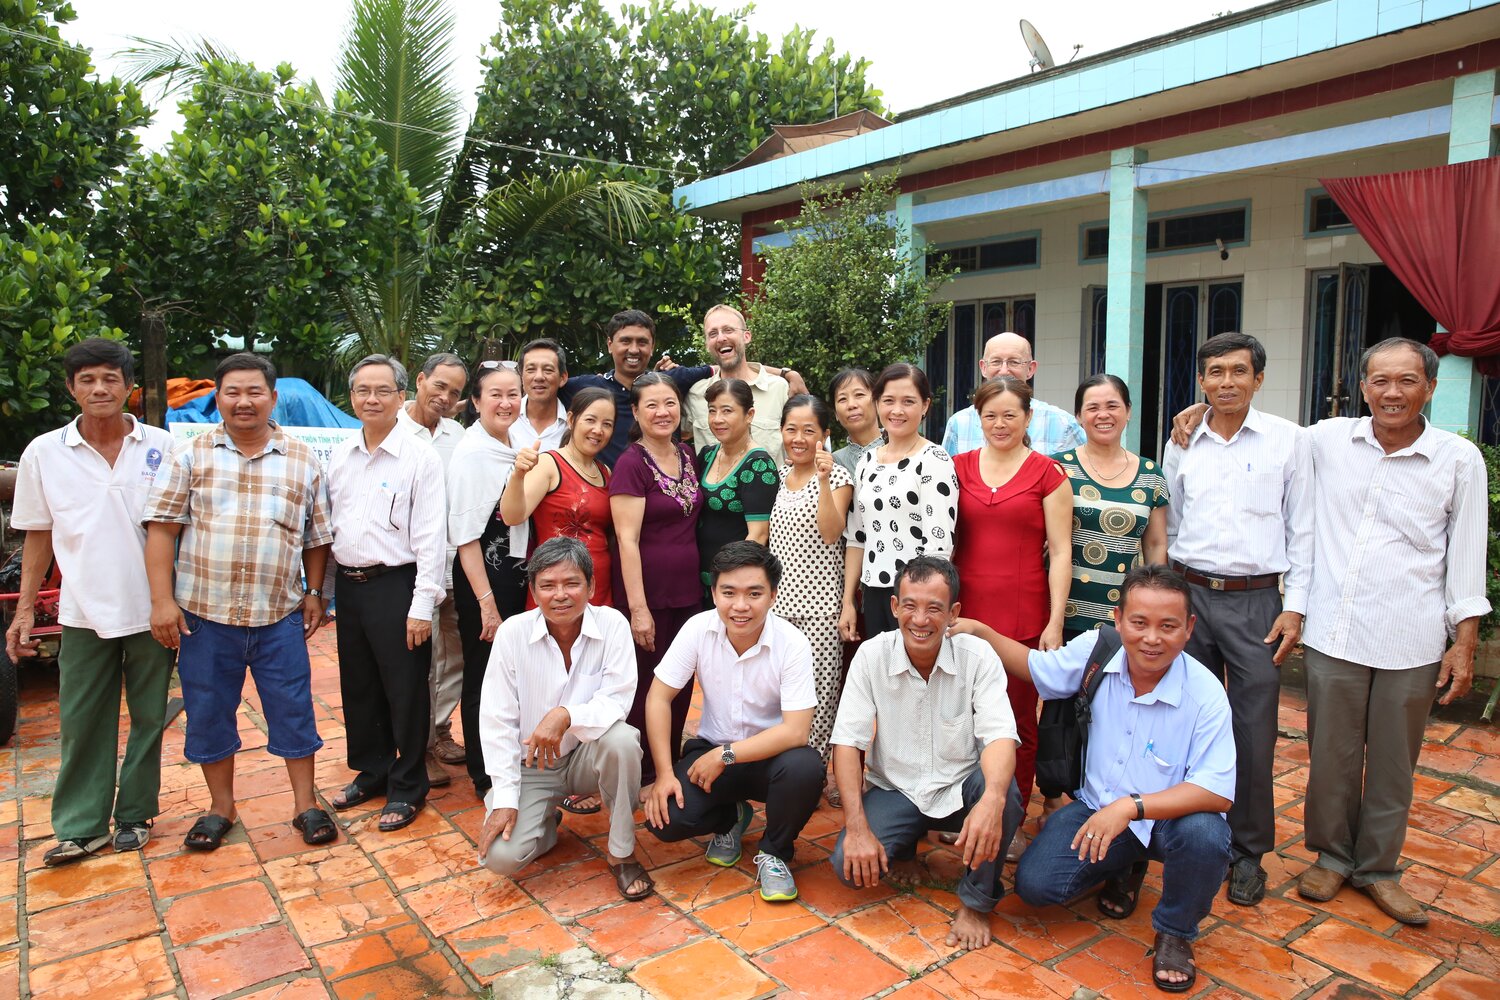 On our last day in Vietnam, and after visiting the fourth on-farm rice trials, Ben Kilian, Senior Scientist at the Crop Trust; Venu Ramaiah, Genebank Manager at IRRI; and Åsmund Bjornstad, from the Norwegian University of Life Sciences: NMBU, pose with our Crop Wild Relatives partners from the Mekong Delta Development Research Institute, Can Tho University, and members of the Hau My Trinh Seed Club in the Tien Giang province. Photo: L.M. Salazar